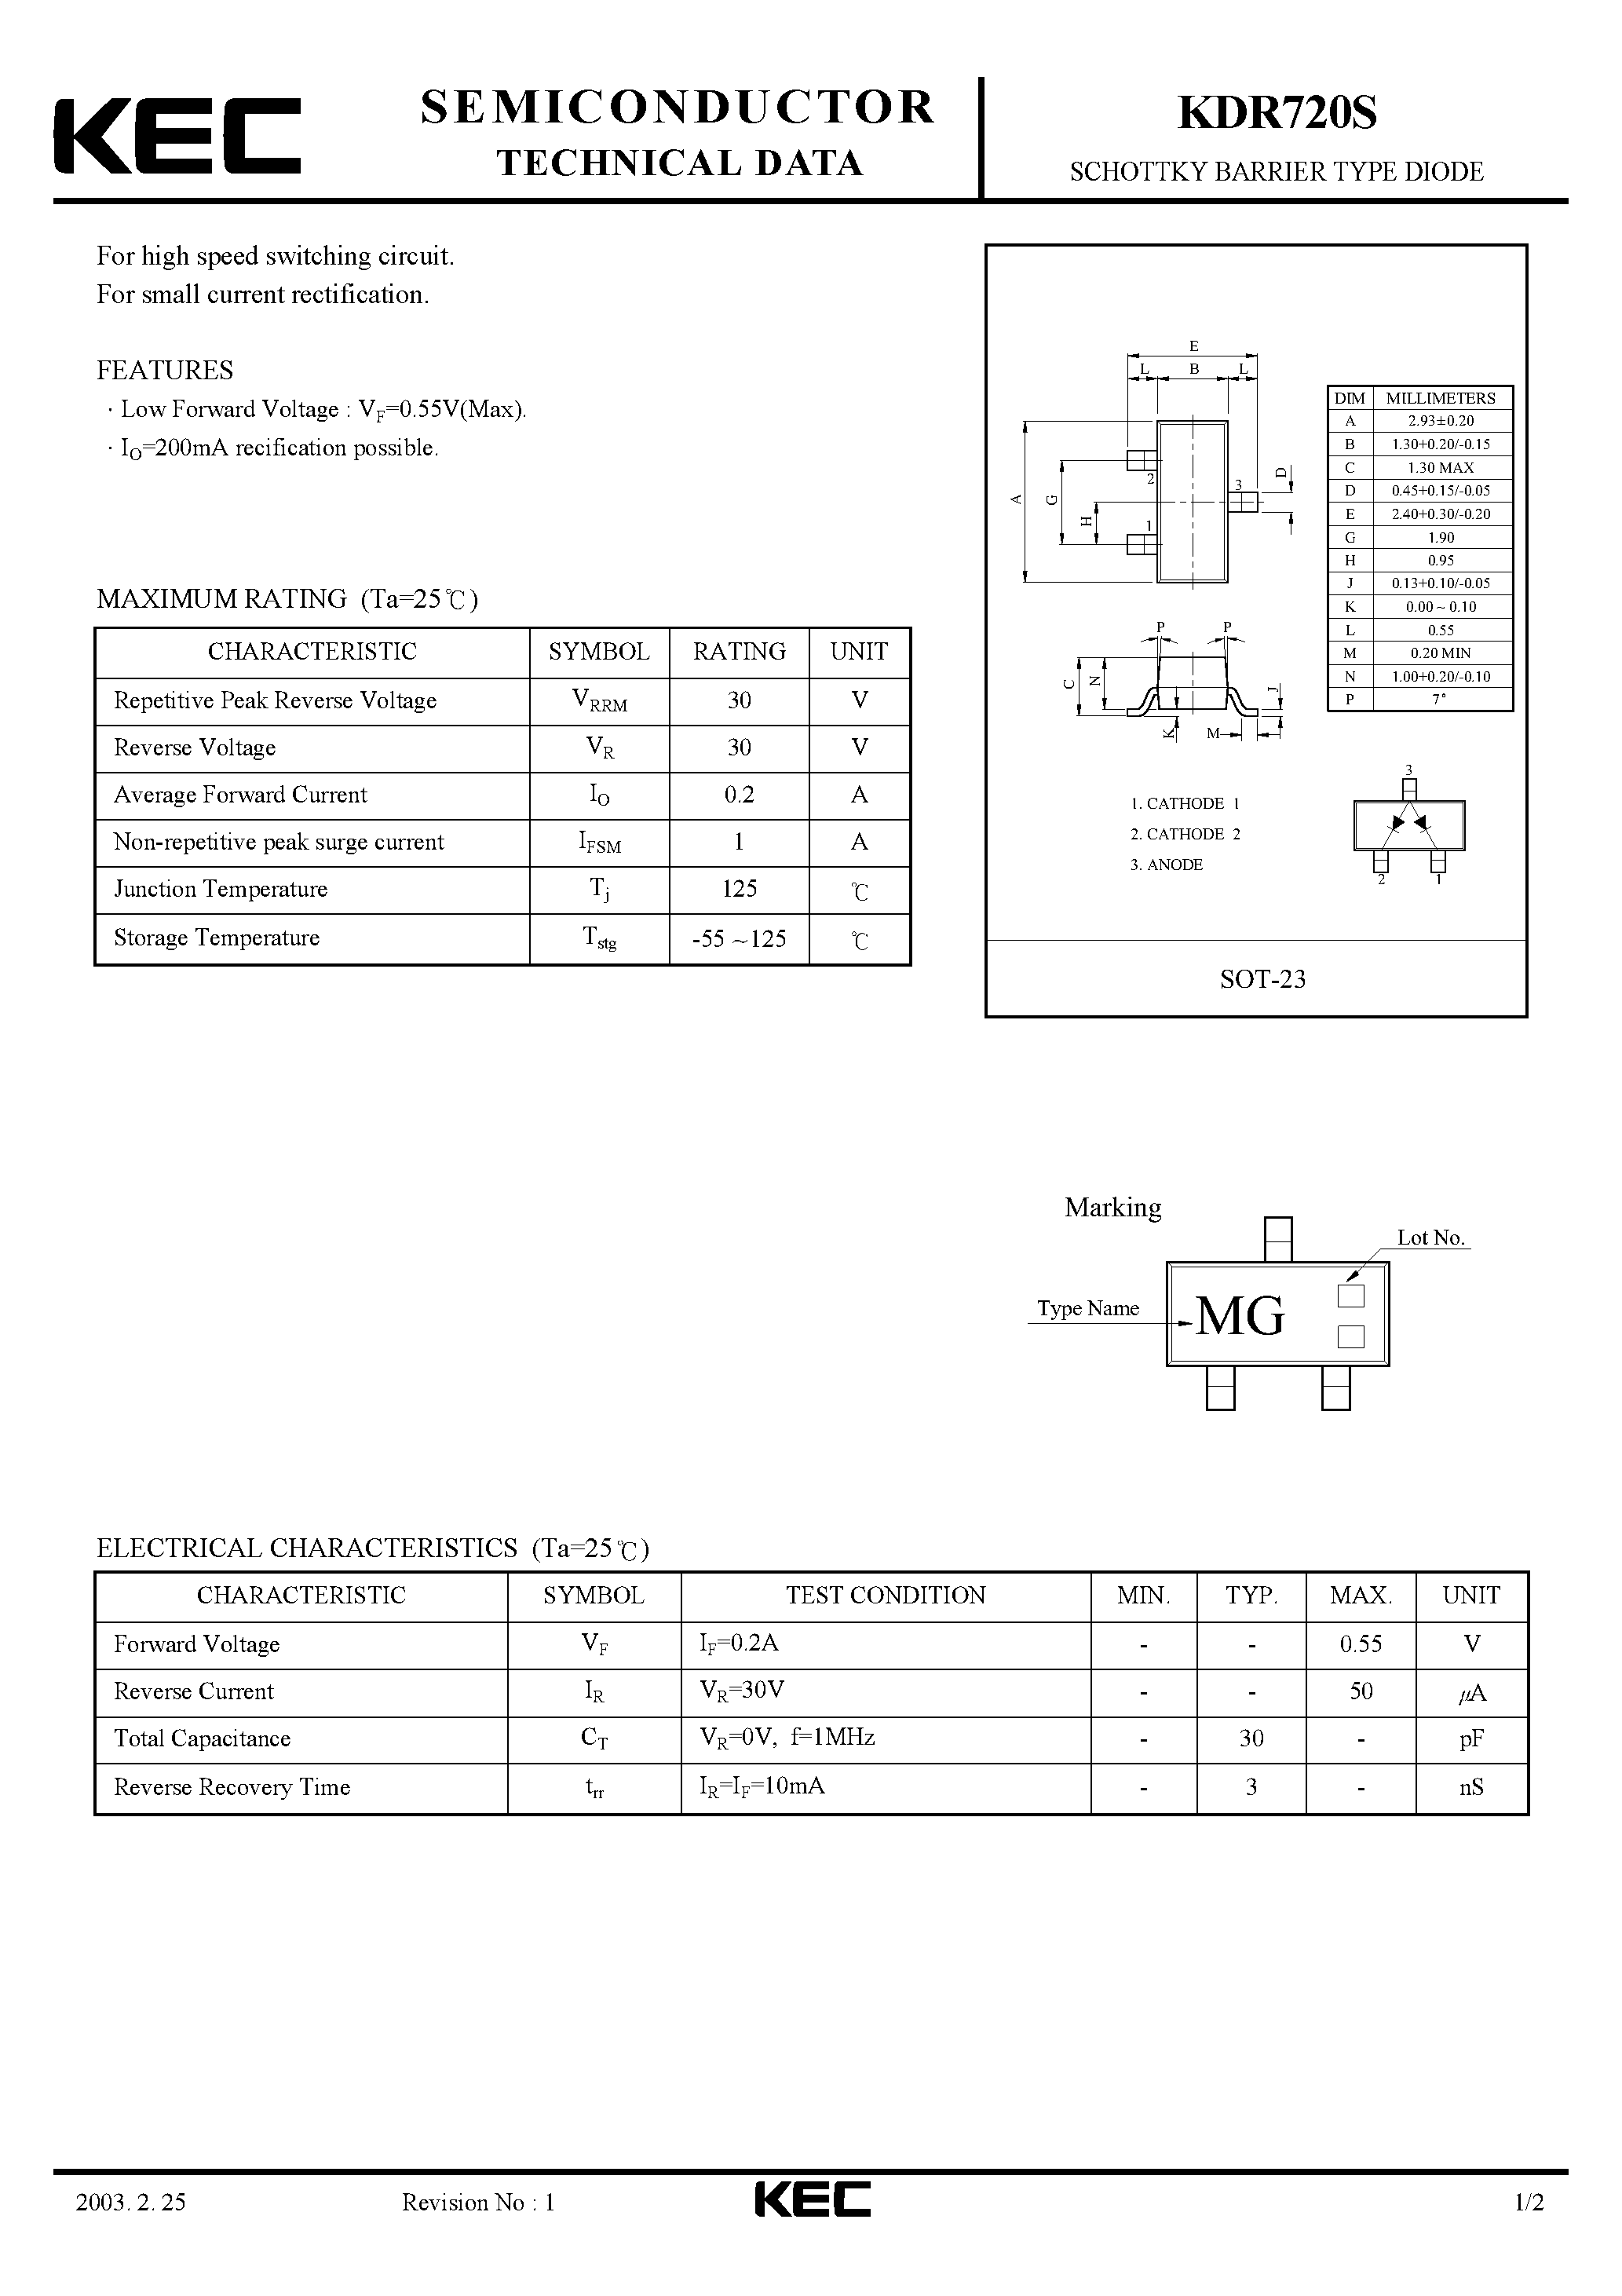 Datasheet KDR720S - SCHOTTKY BARRIER TYPE DIODE(FOR HIGH SPEED SWITCHING CIRCUIT/ FOR SMALL CURRENT RECTIFICATION) page 1